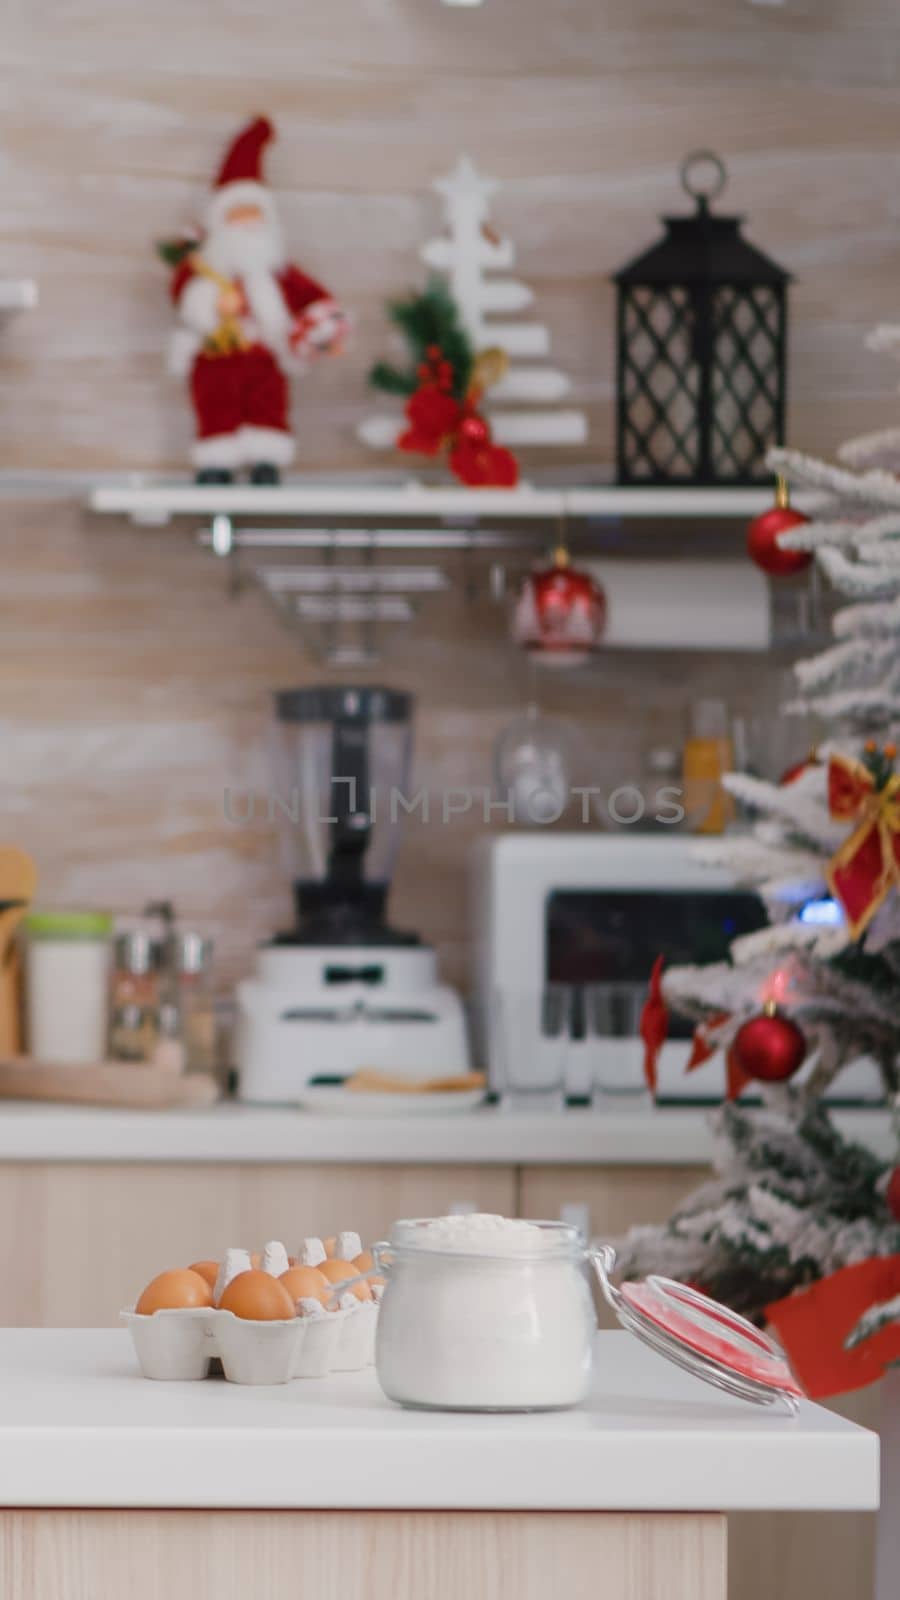 Empty christmas decorated culinary kitchen with nobody in it ready for traditional festive holiday by DCStudio